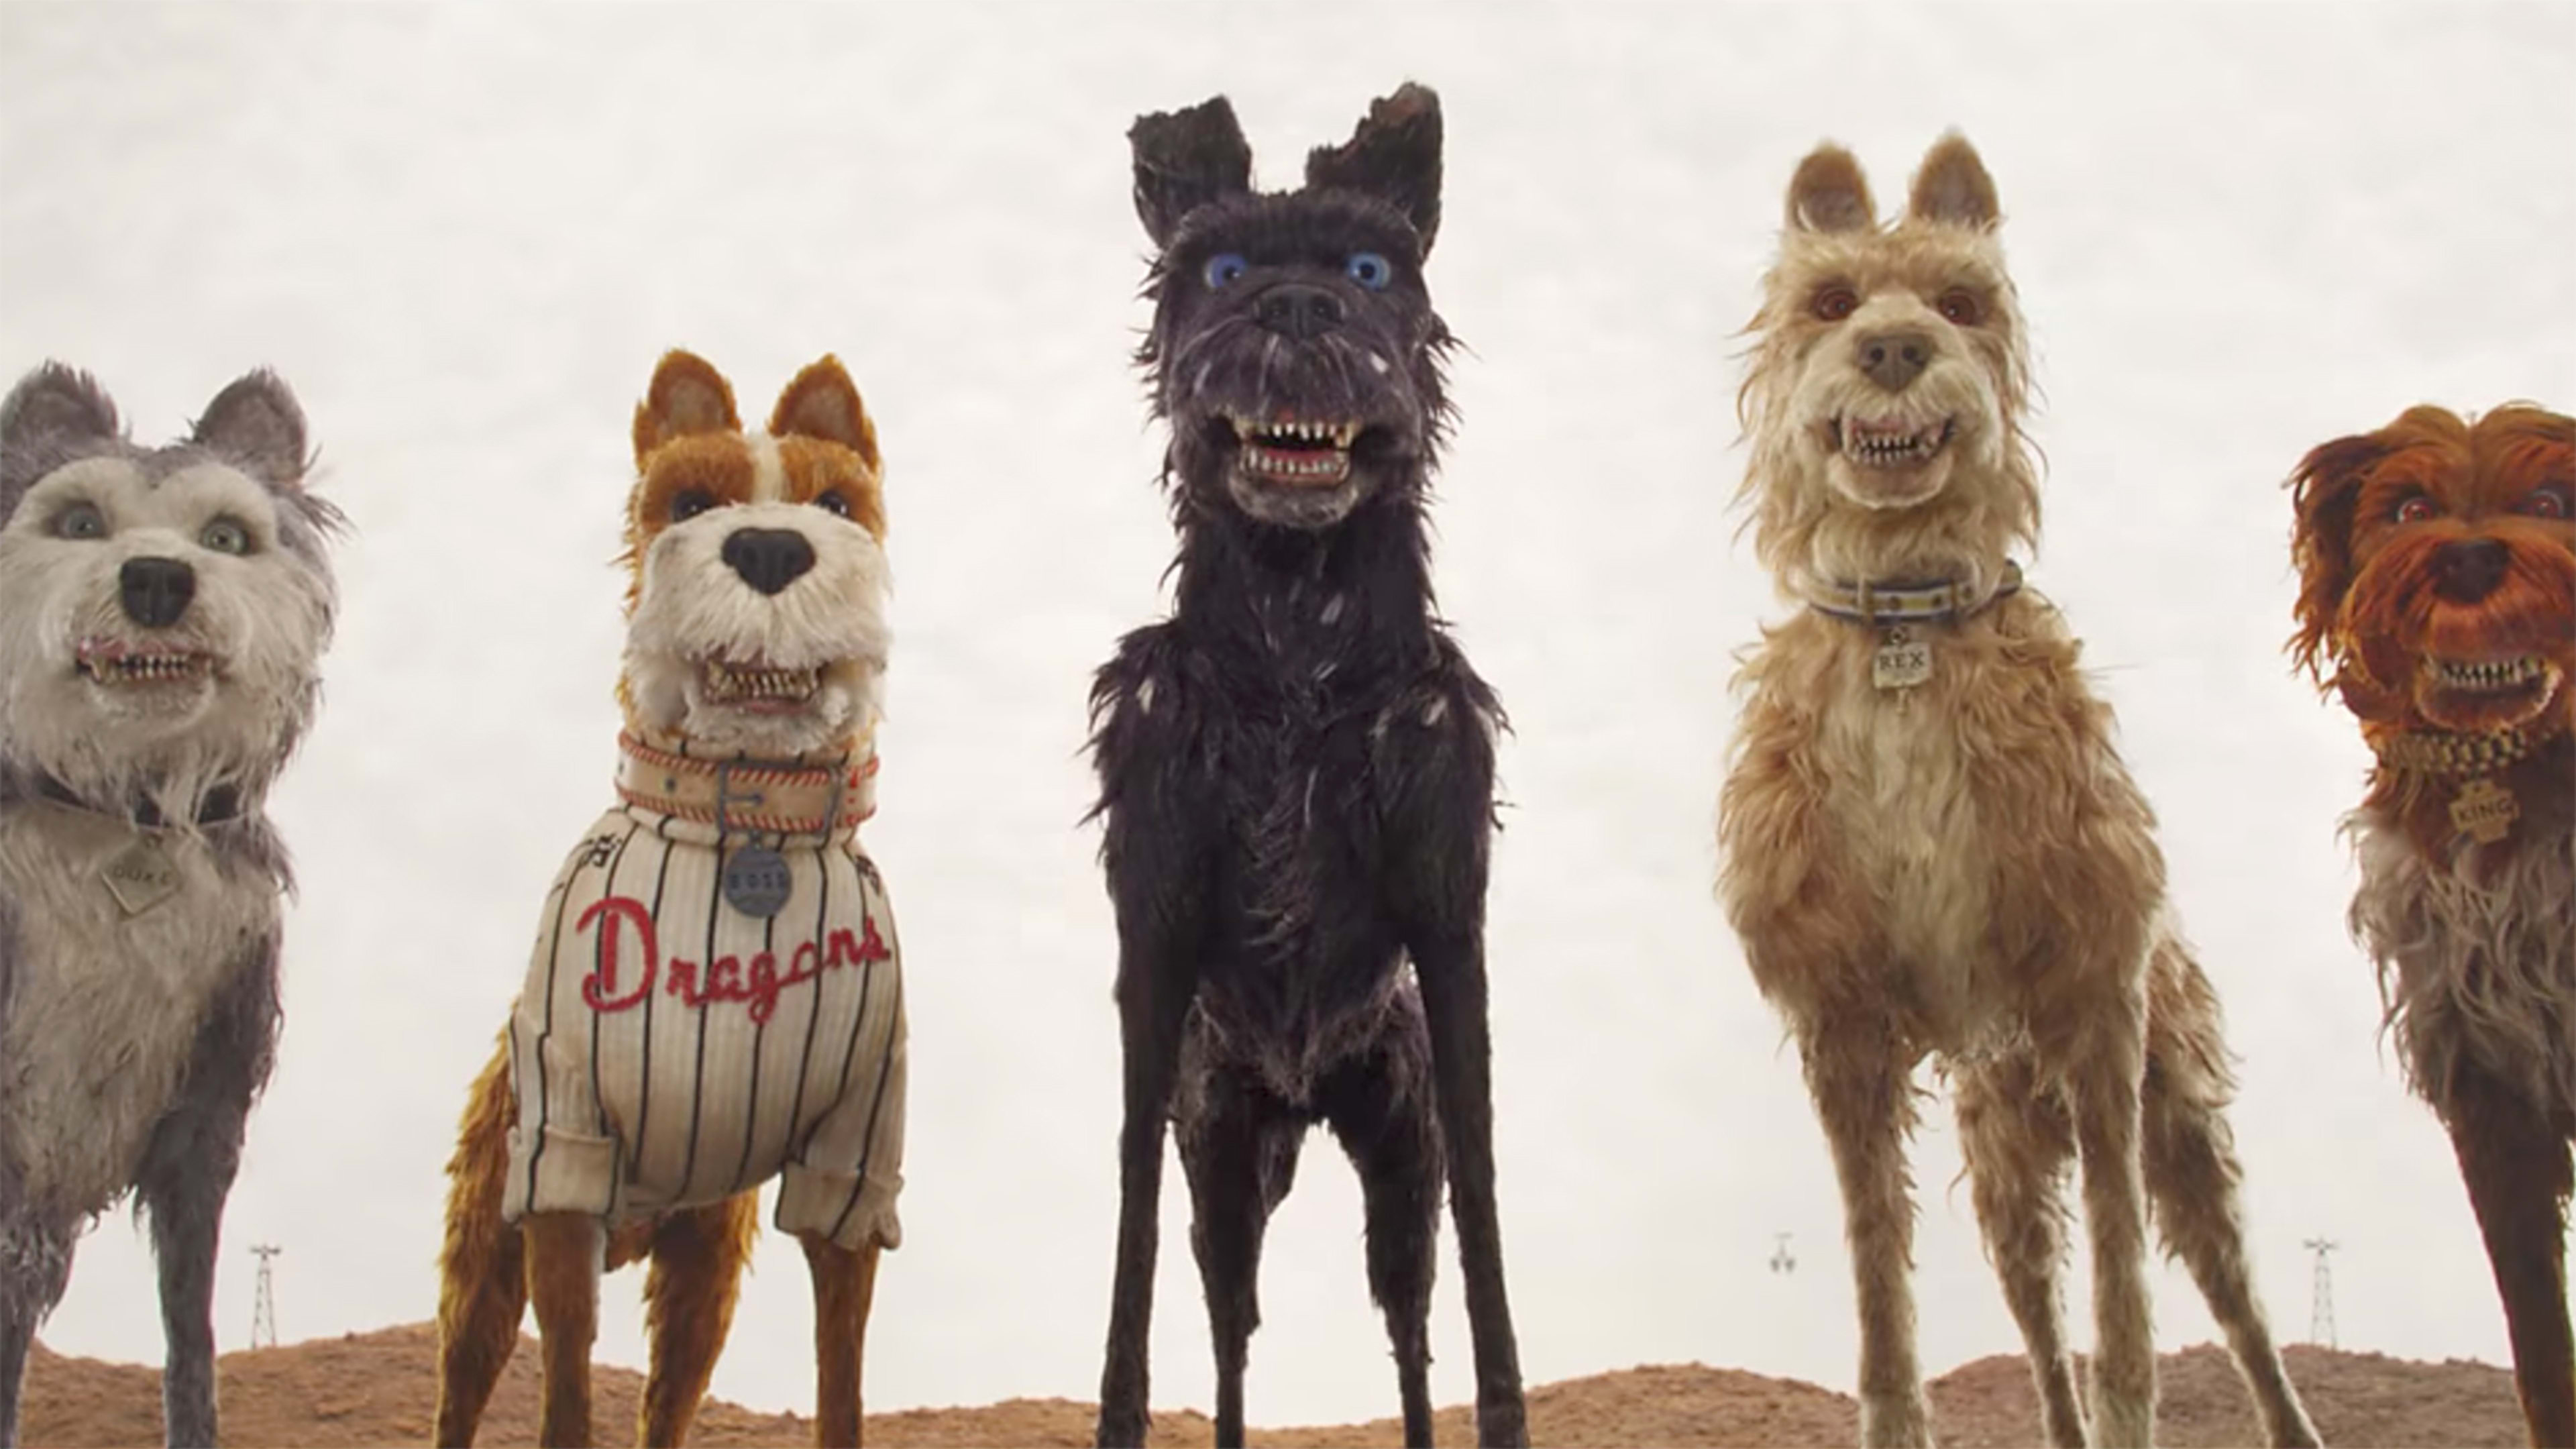 Watch The Trailer For Wes Anderson’s New Stop-Motion Film “Isle Of Dogs”